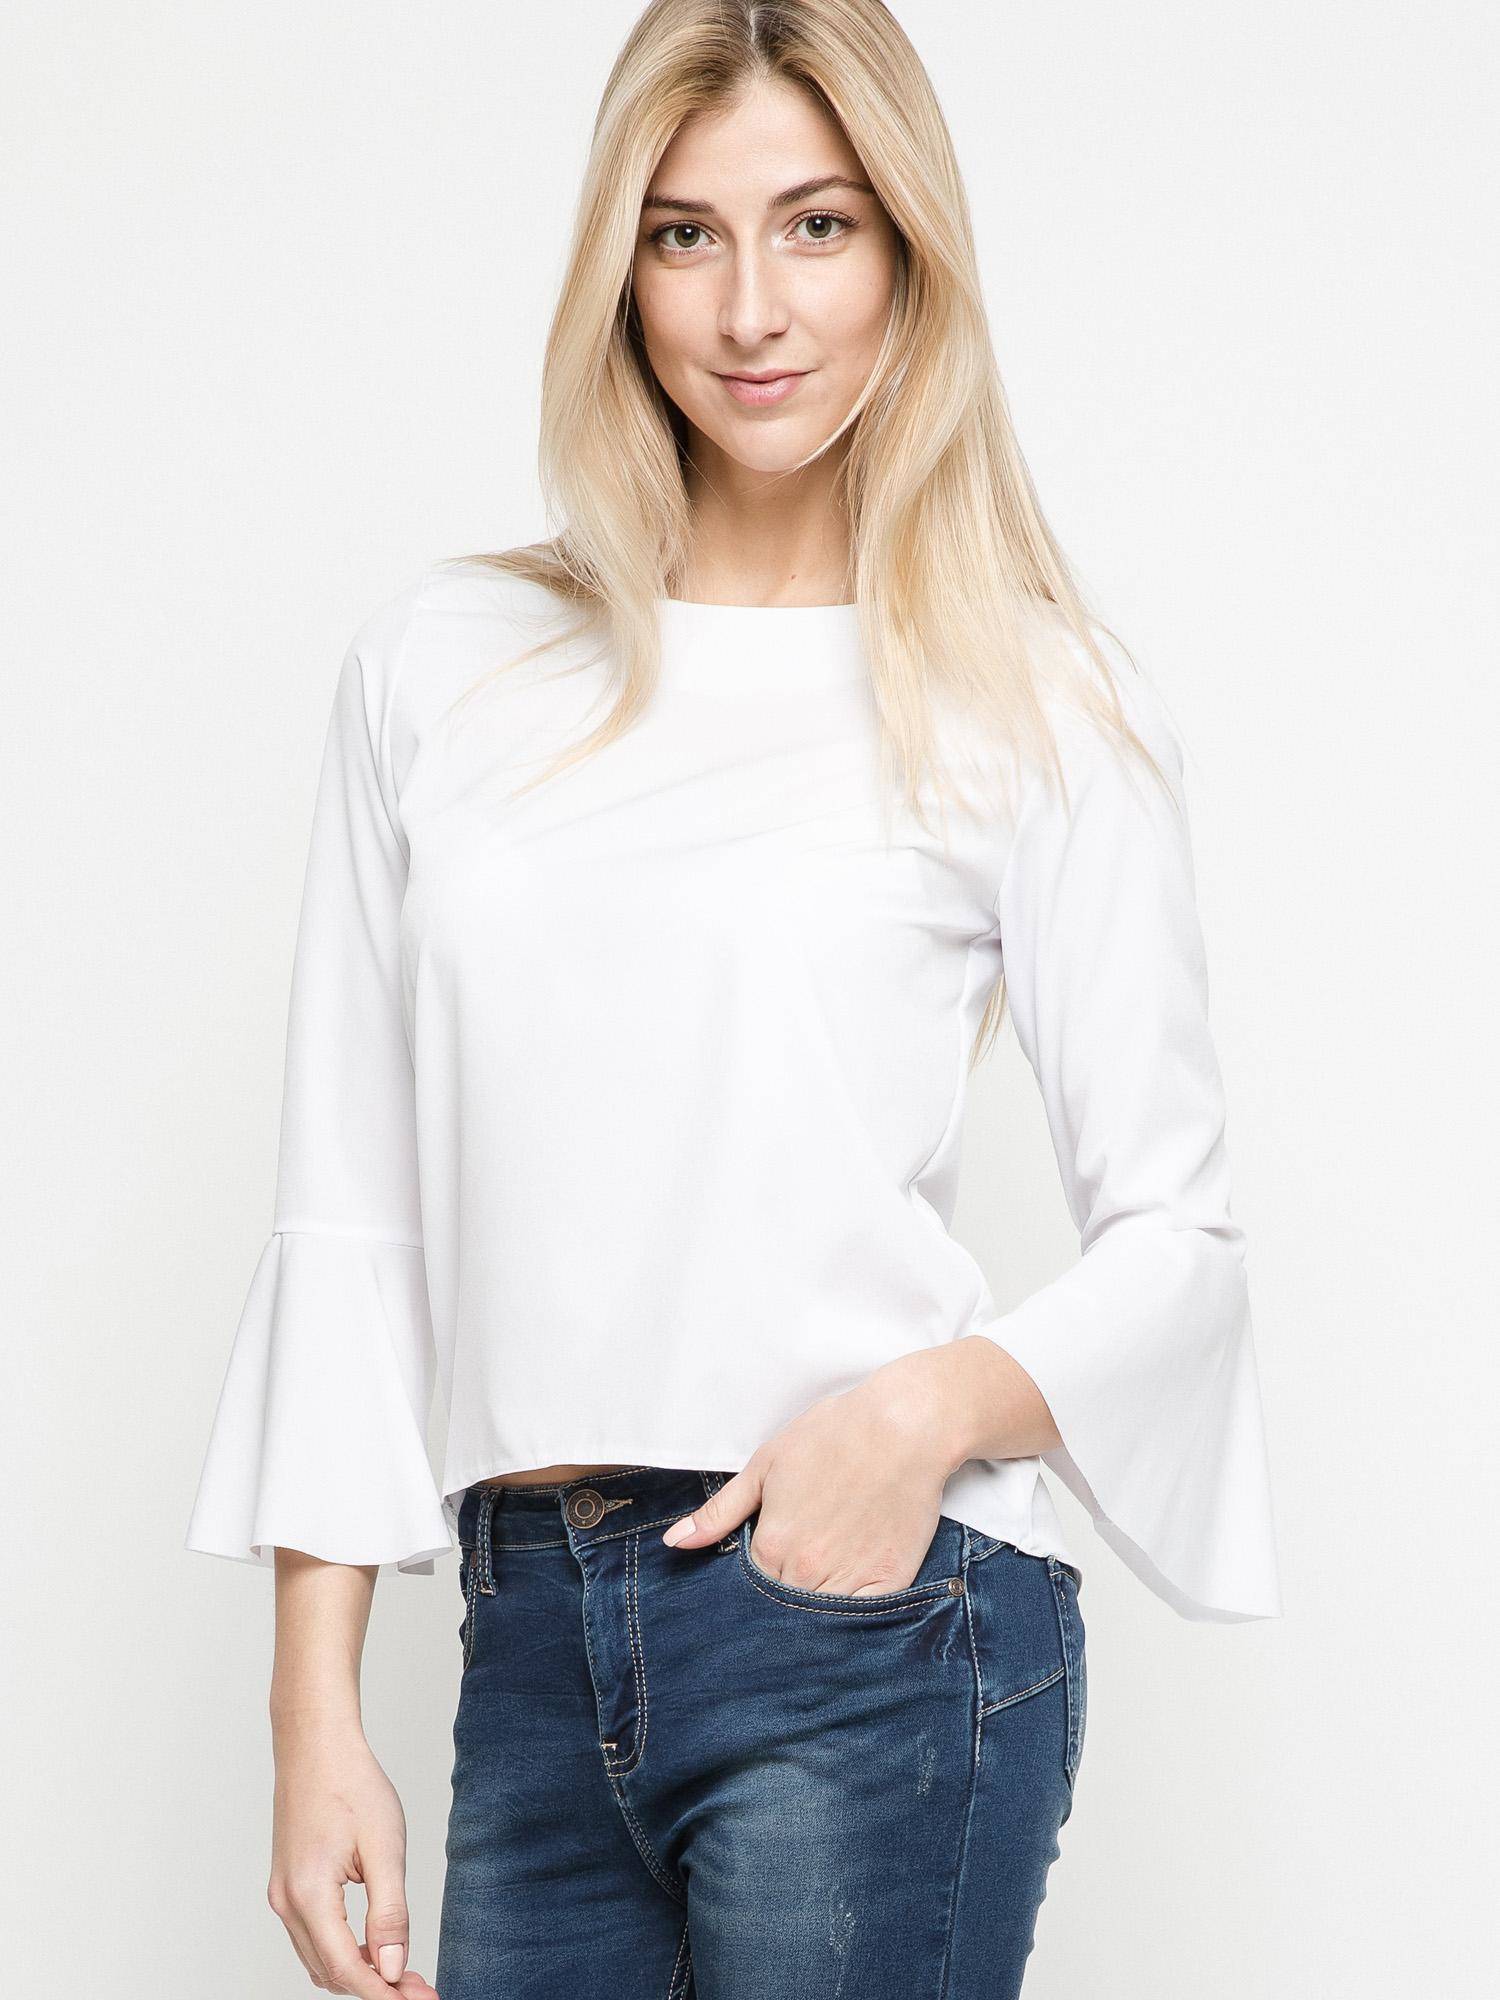 Blouse with lampshaded sleeves white